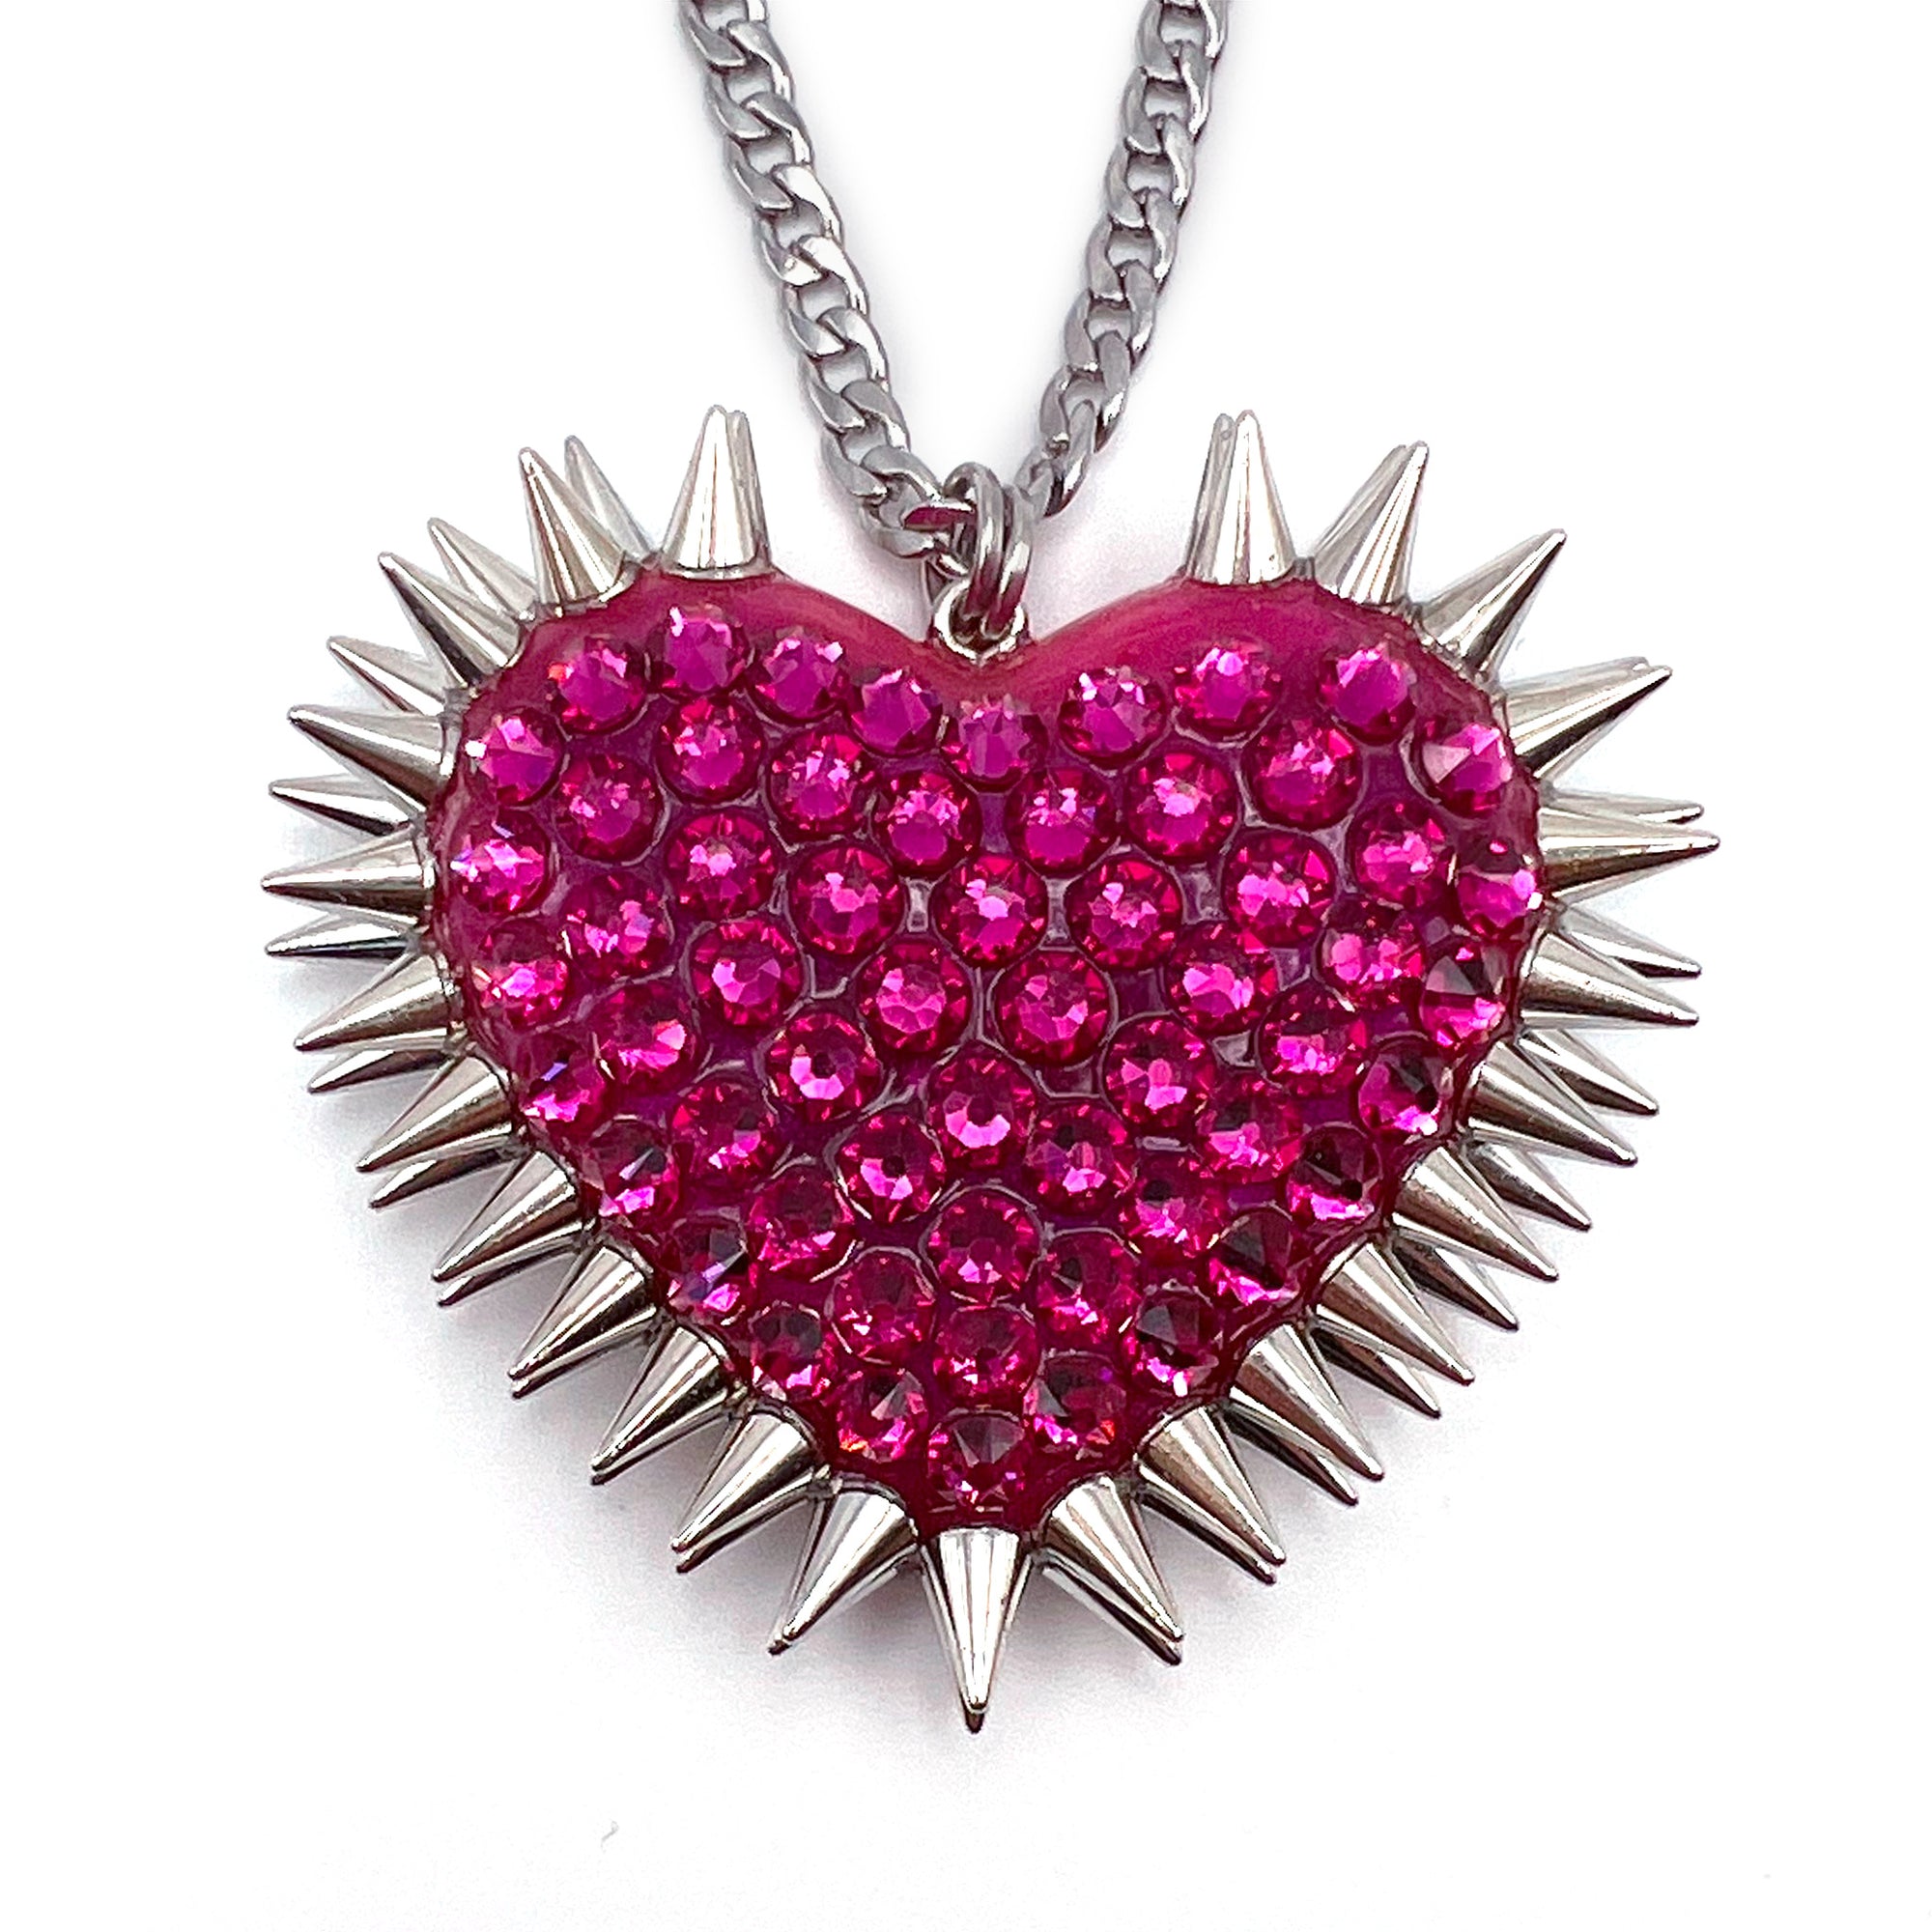 Classic Spiked & Paved Heart Necklace | Fuchsia